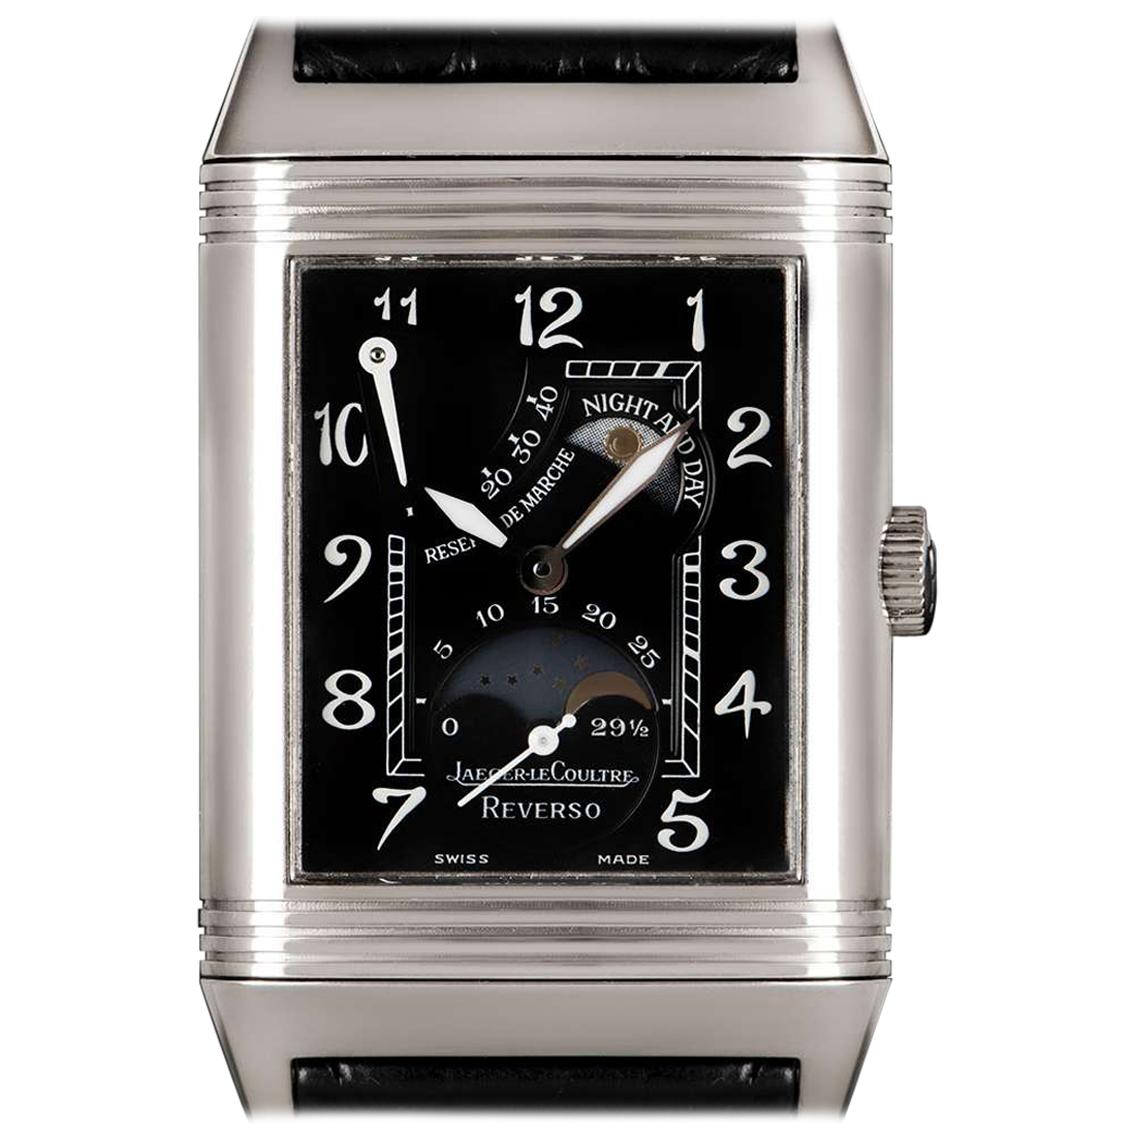 Jaeger LeCoultre Day & Night Reverso White Gold 270.3.63 Manual Wind Wristwatch